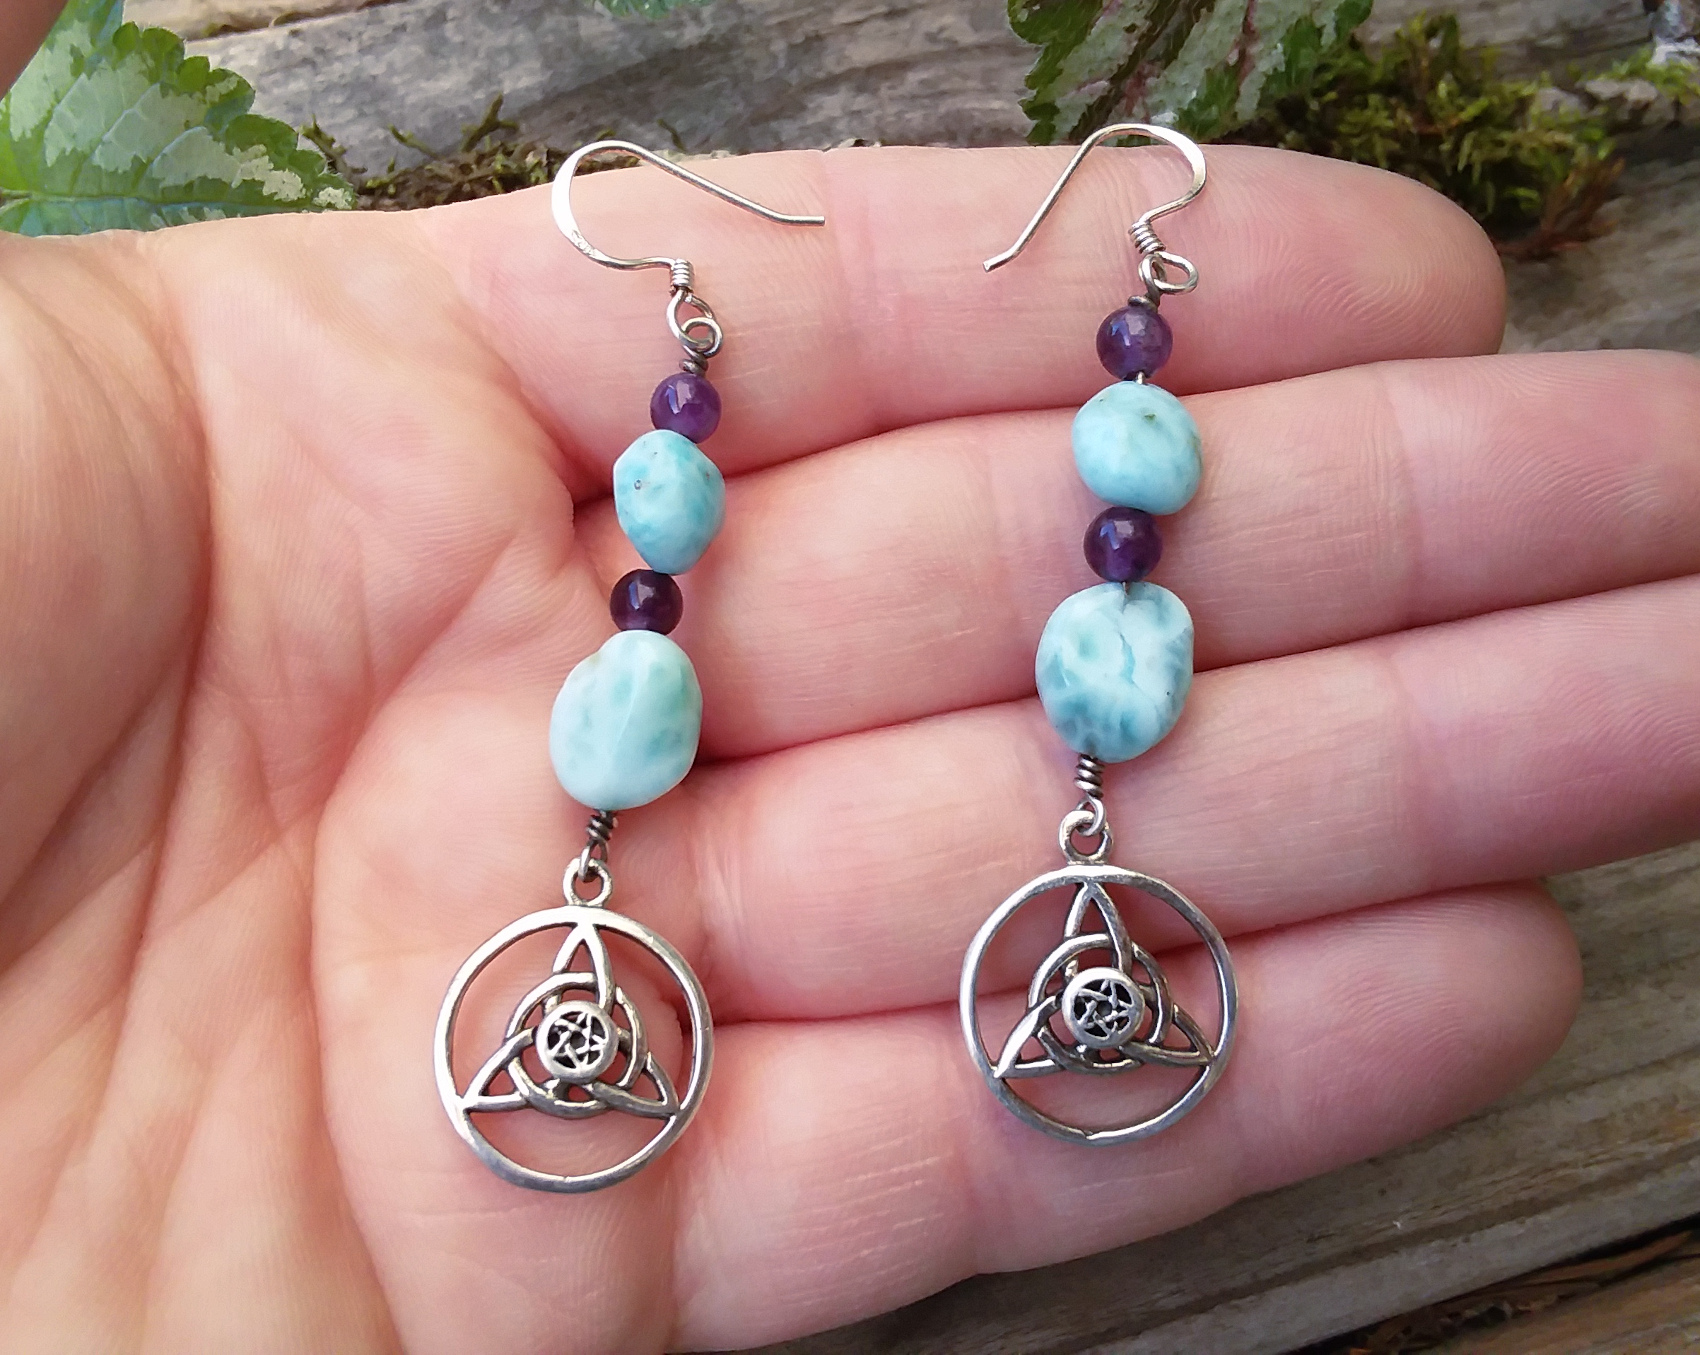 Amethyst & Larimare Triquetra and Pentacle earrings